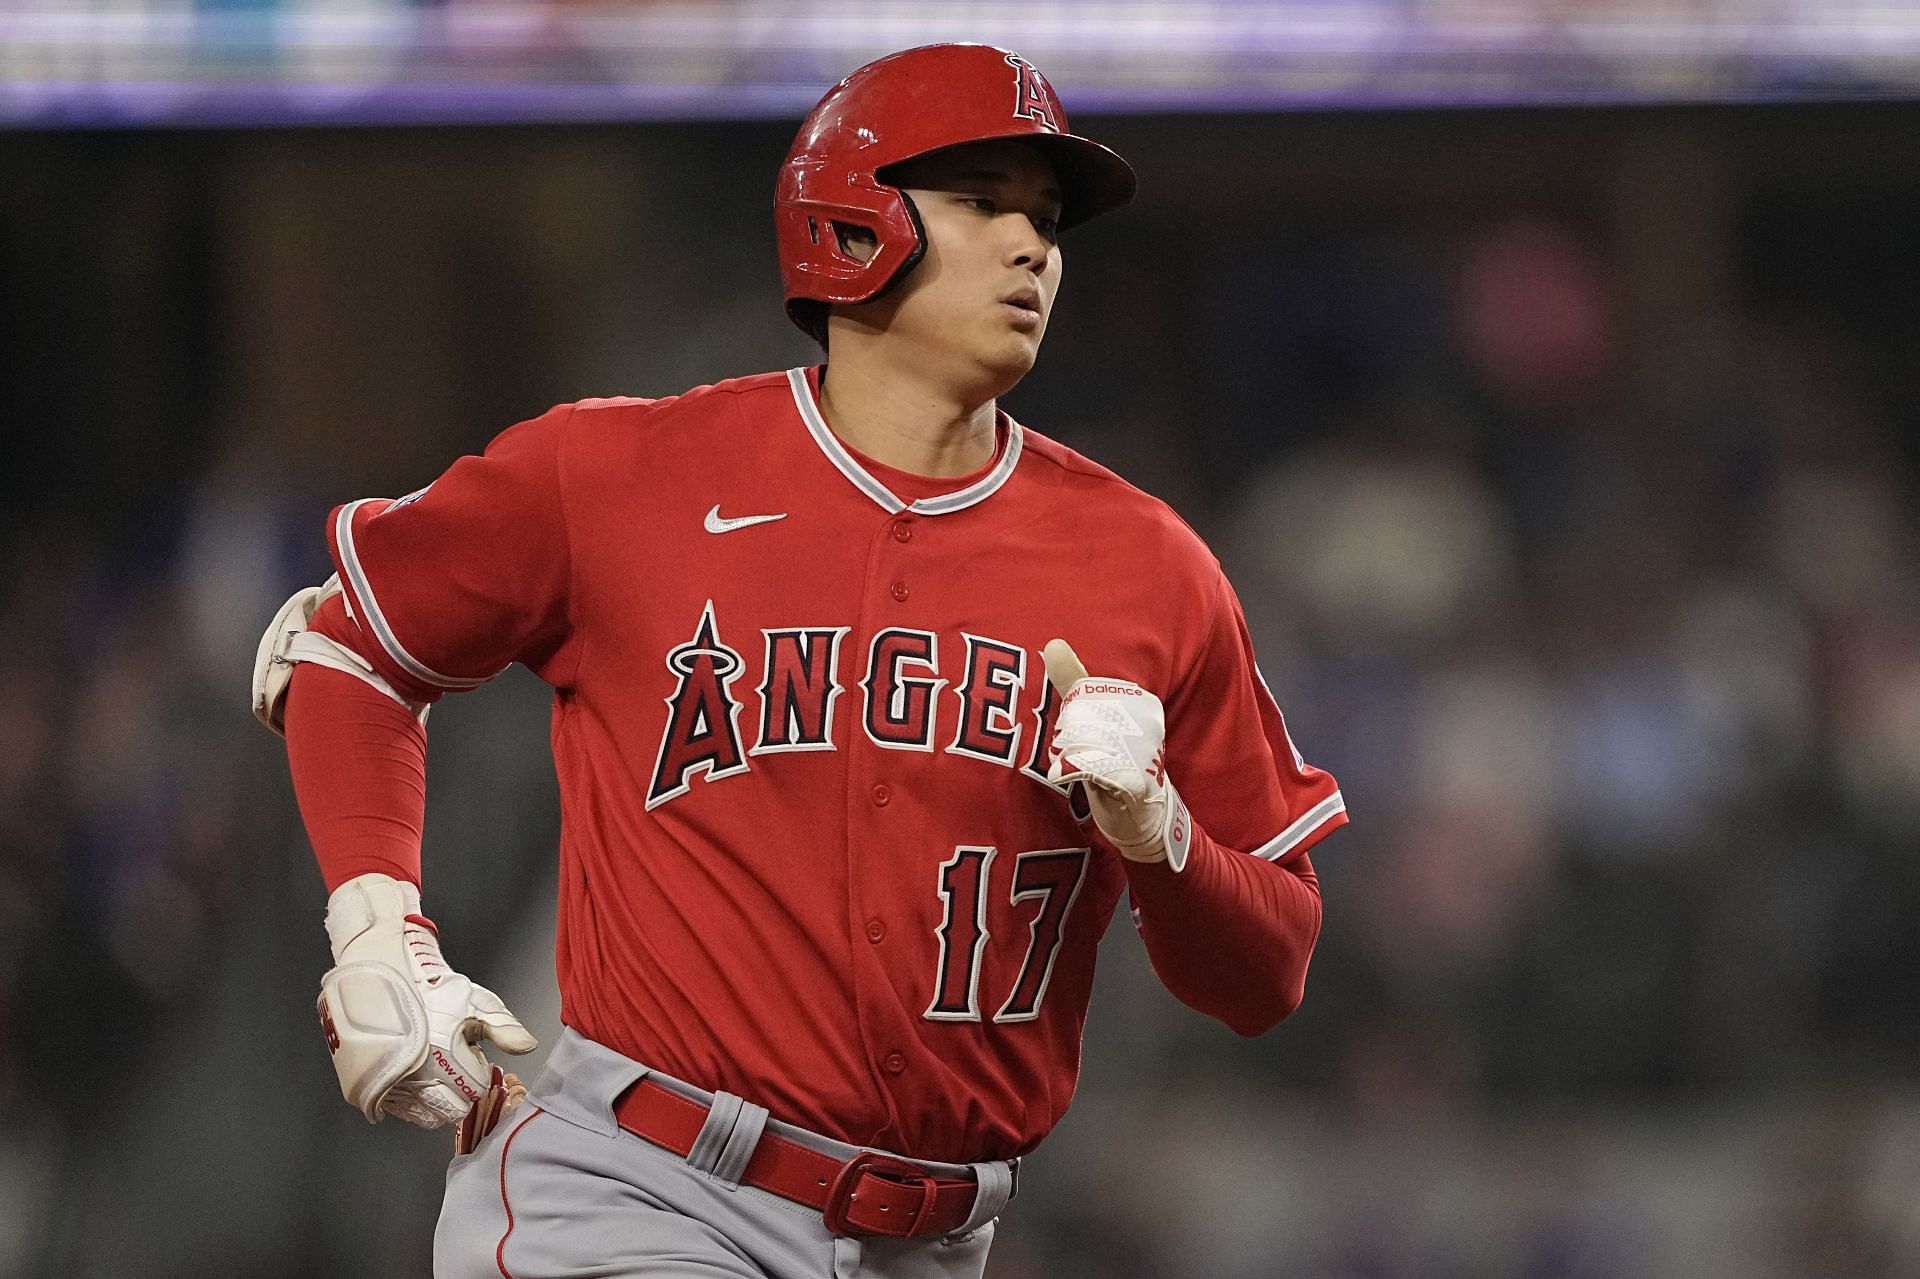 Shohei Ohtani of the Los Angeles Angels runs the bases after hitting a home run at Globe Life Field